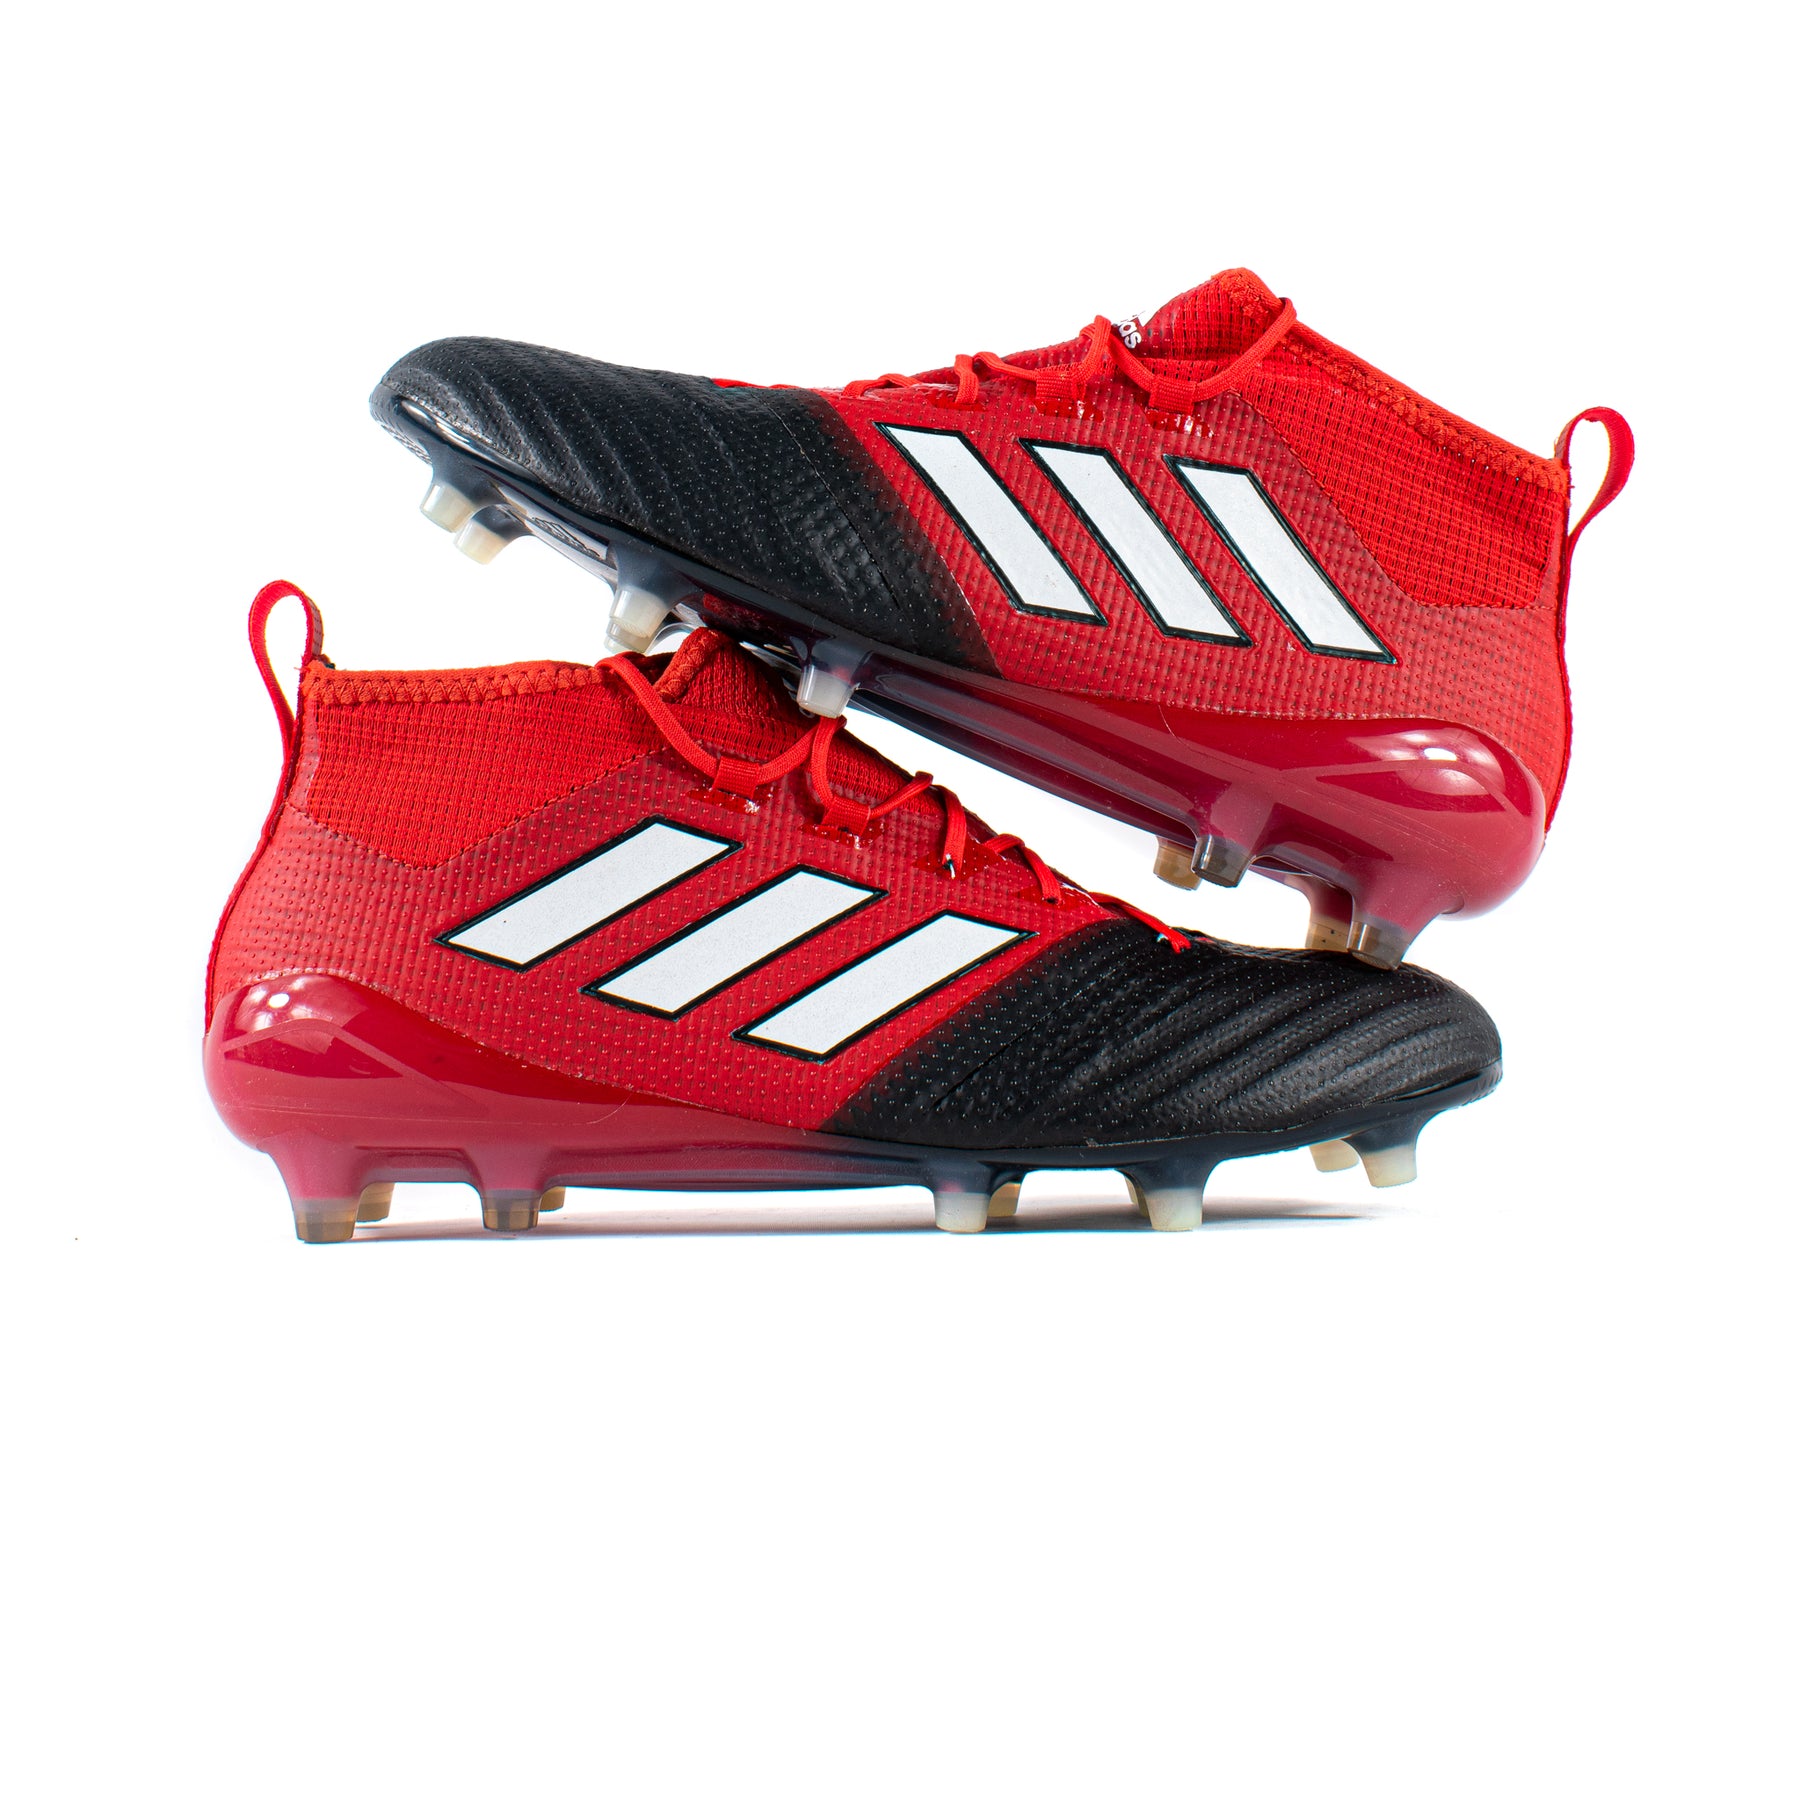 Adidas Ace 17.1 Red – Classic Soccer Cleats